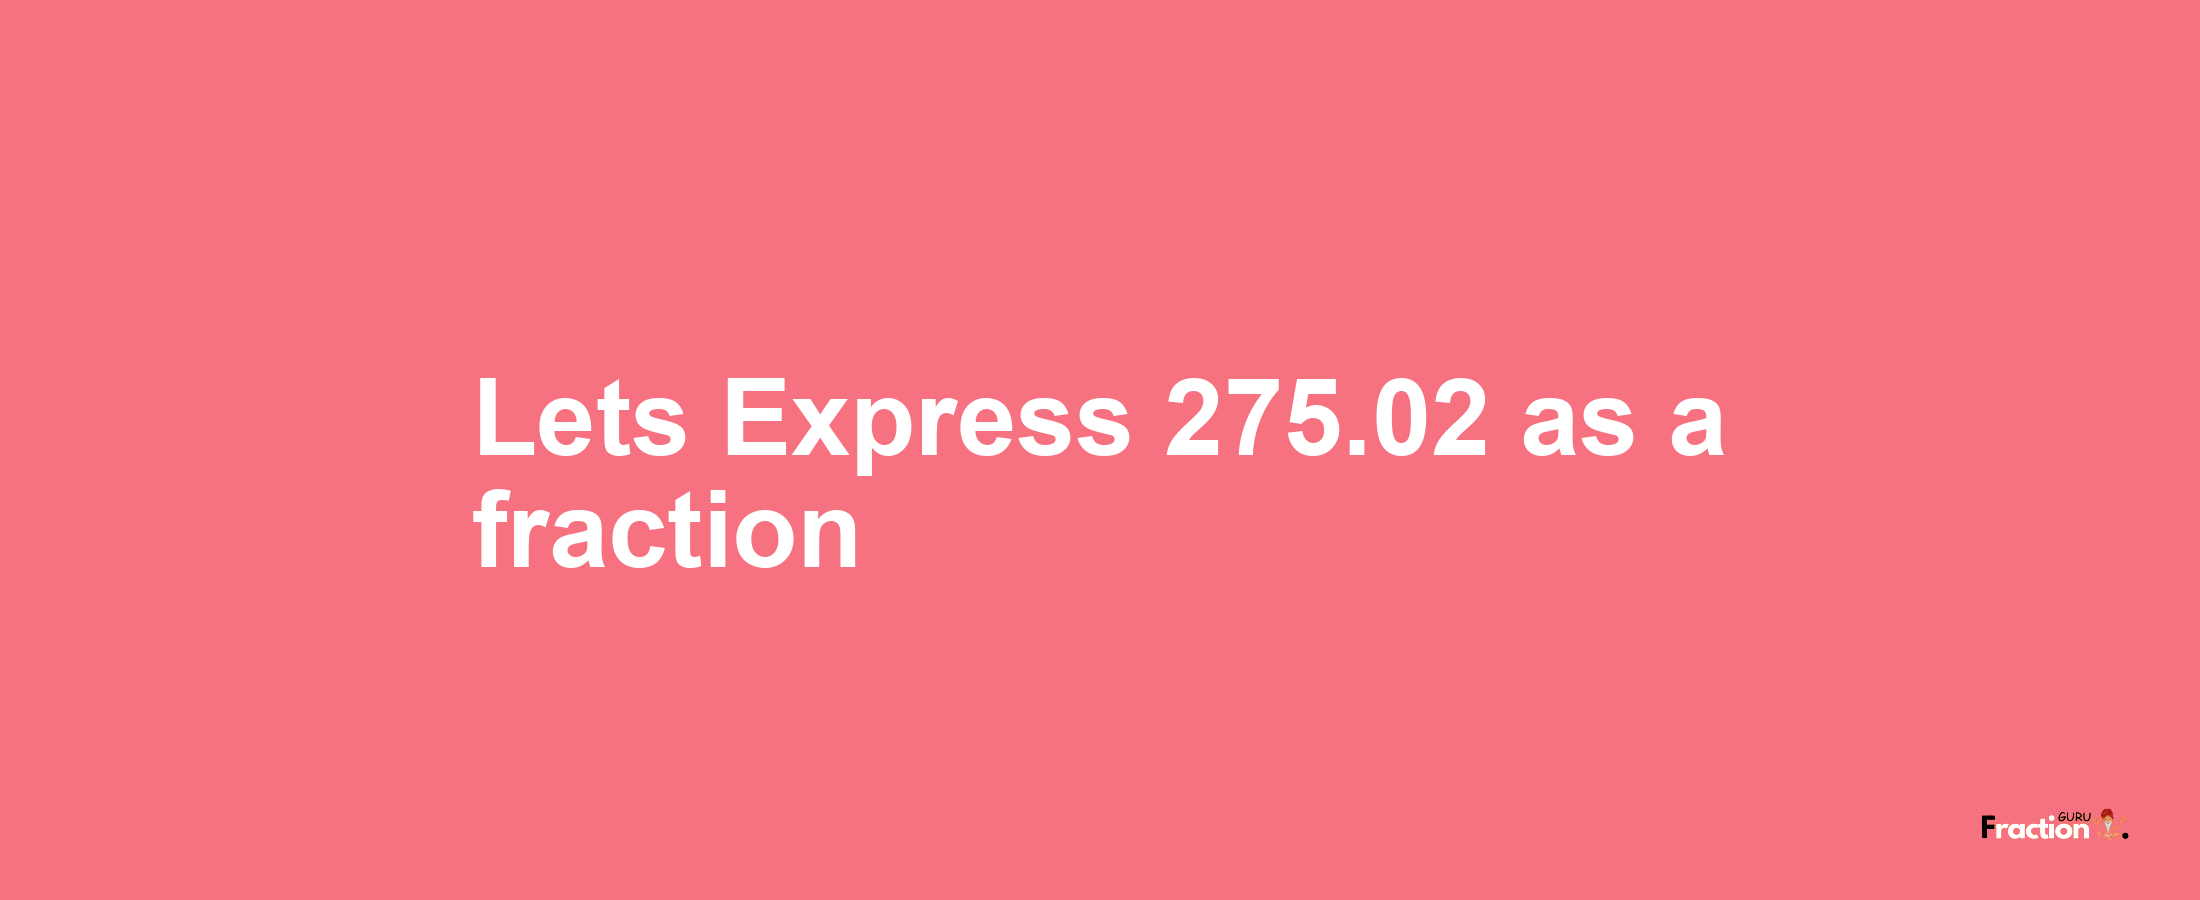 Lets Express 275.02 as afraction